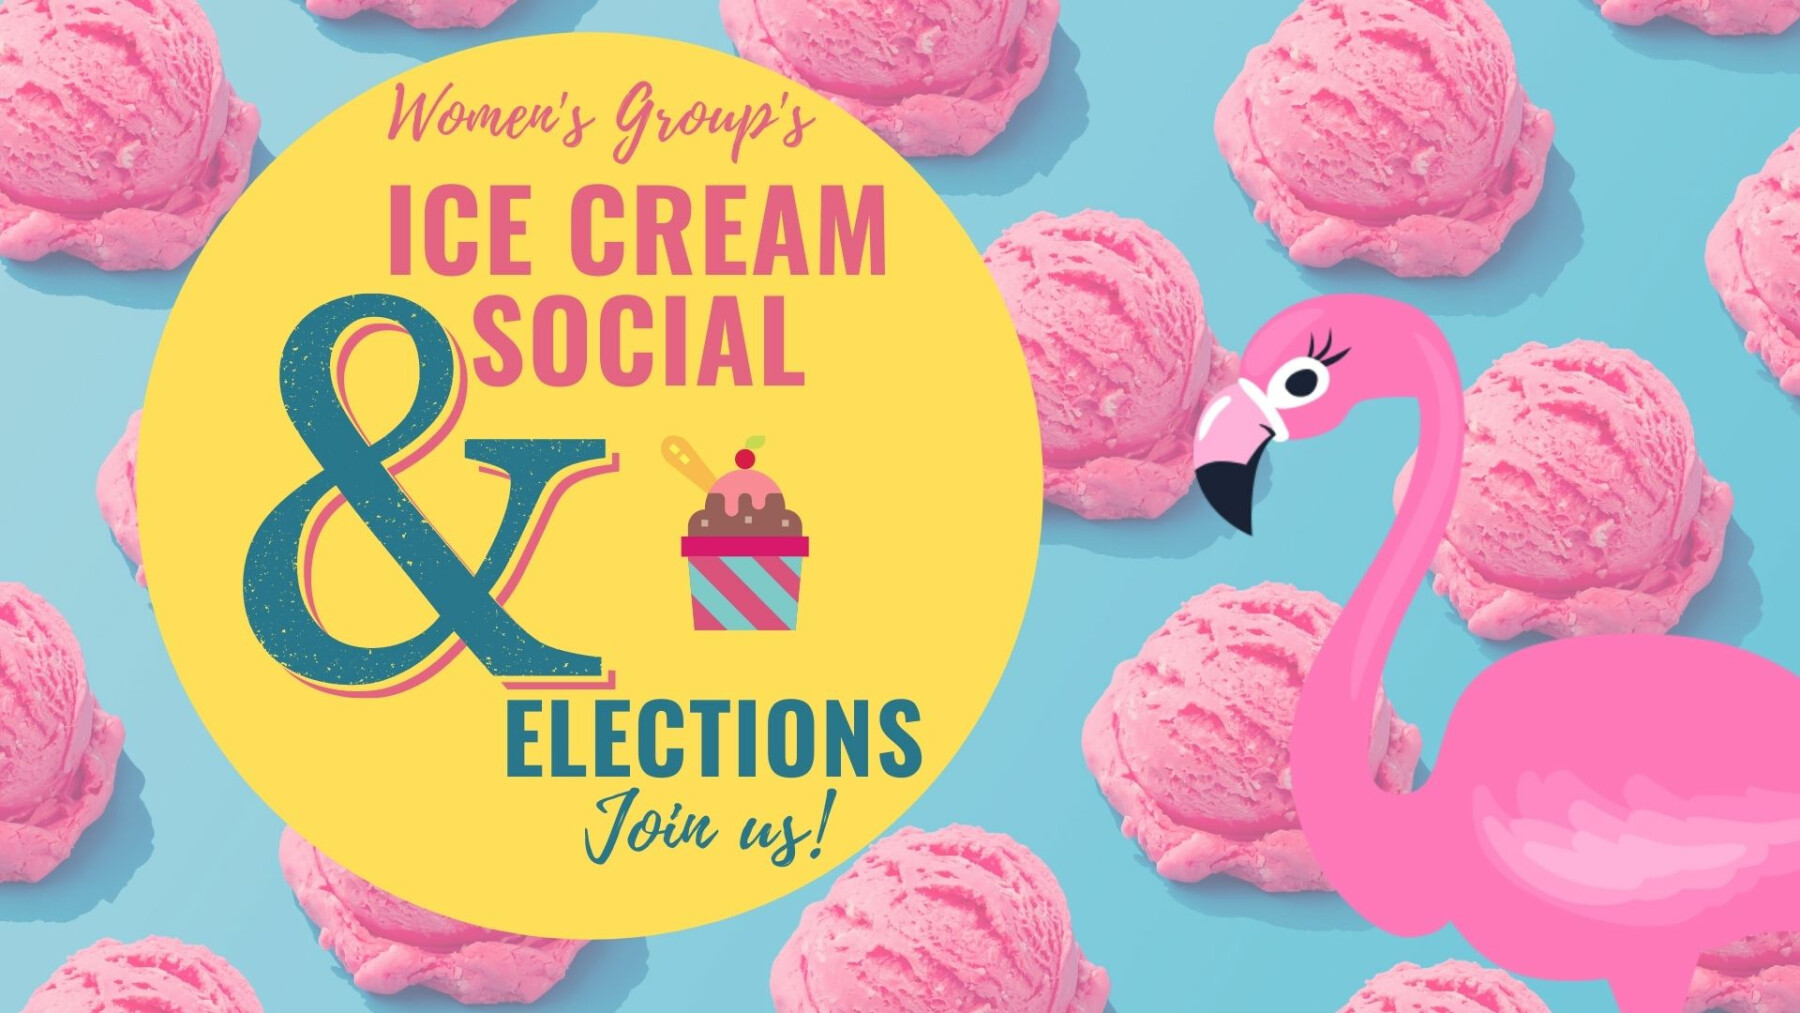 Women's Group Gathering - Ice Cream Social & Elections